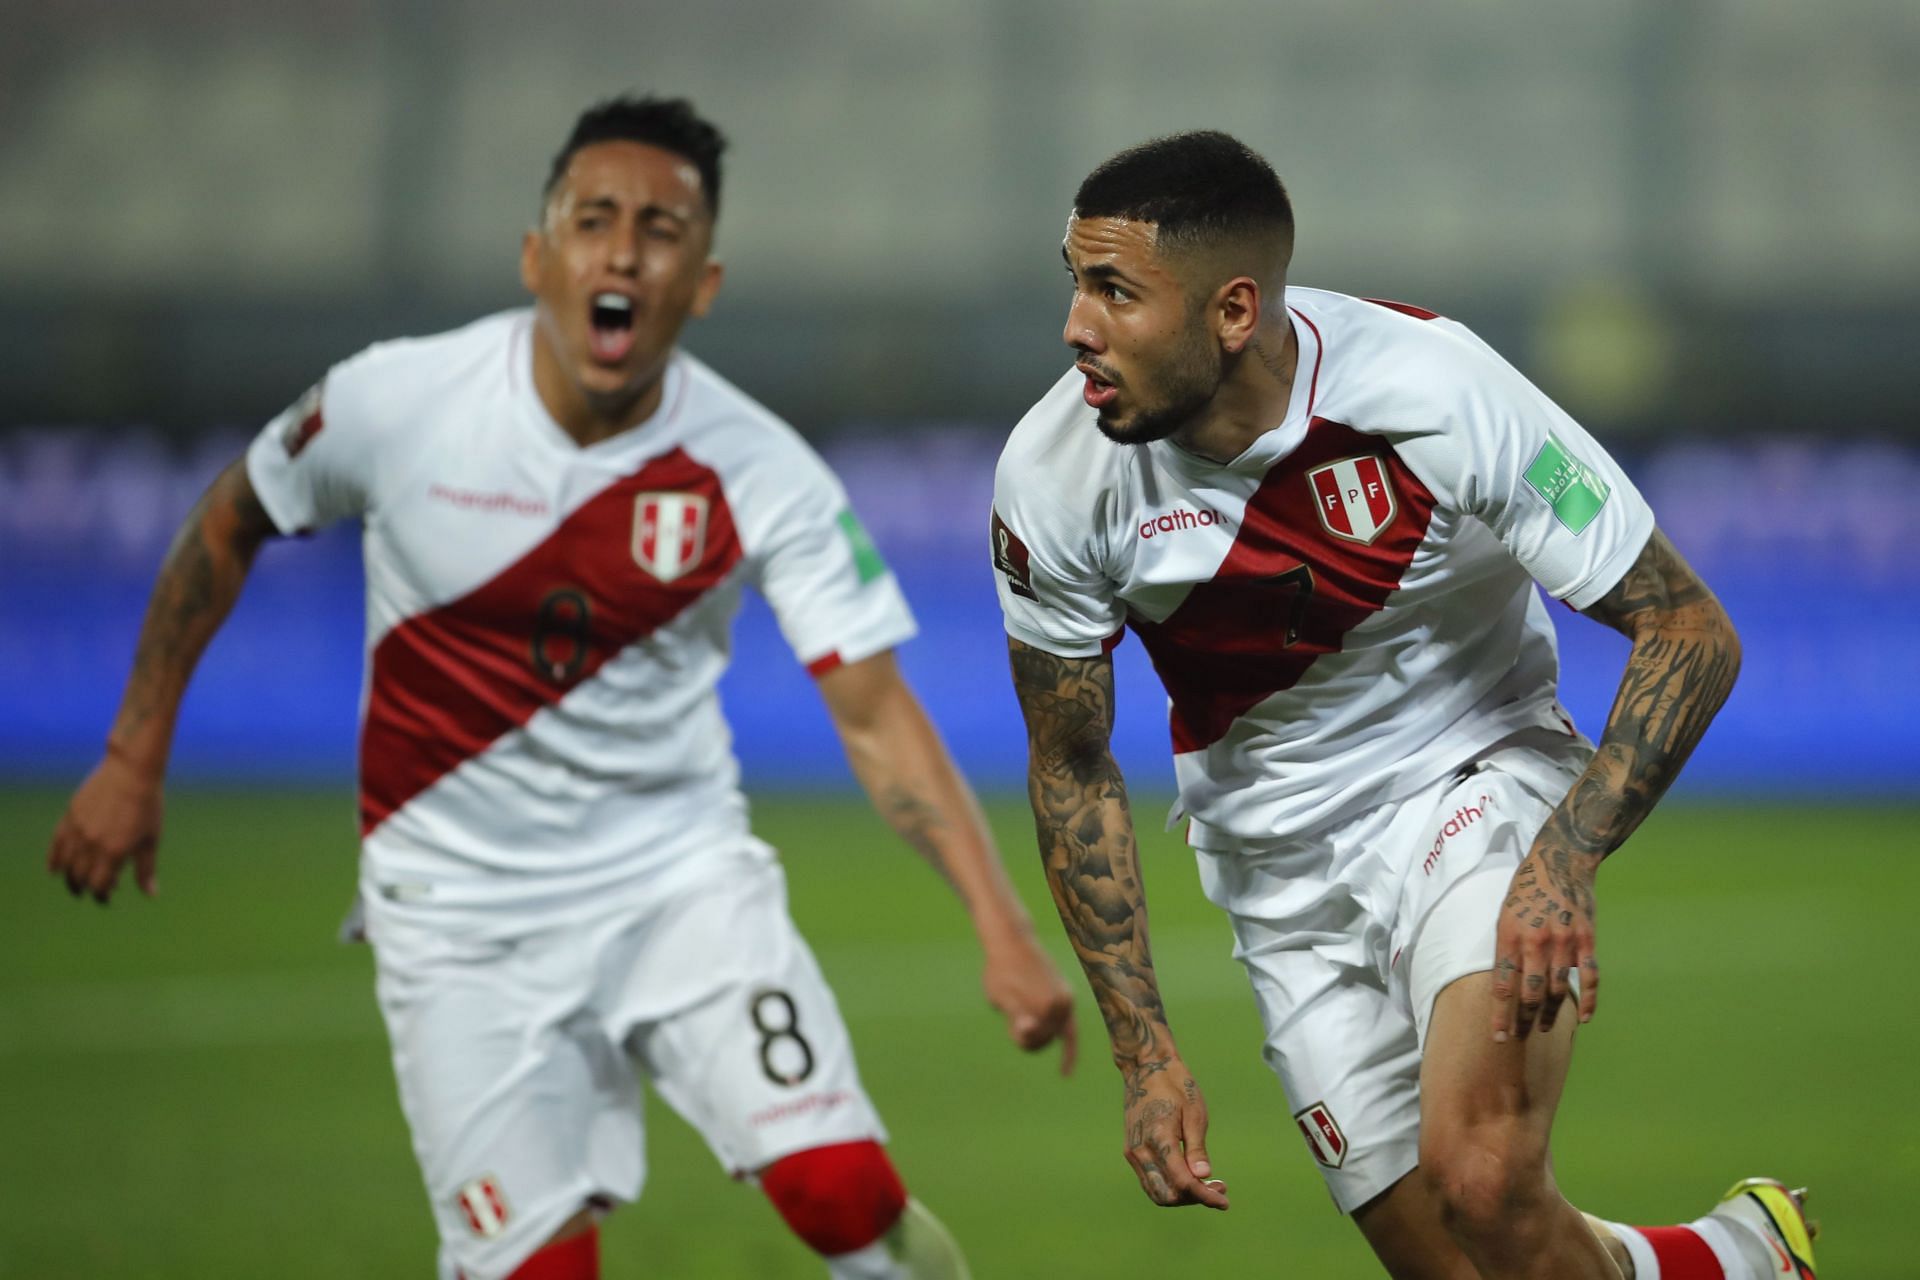 Peru will face Venezuela in a FIFA World Cup qualifier on Tuesday